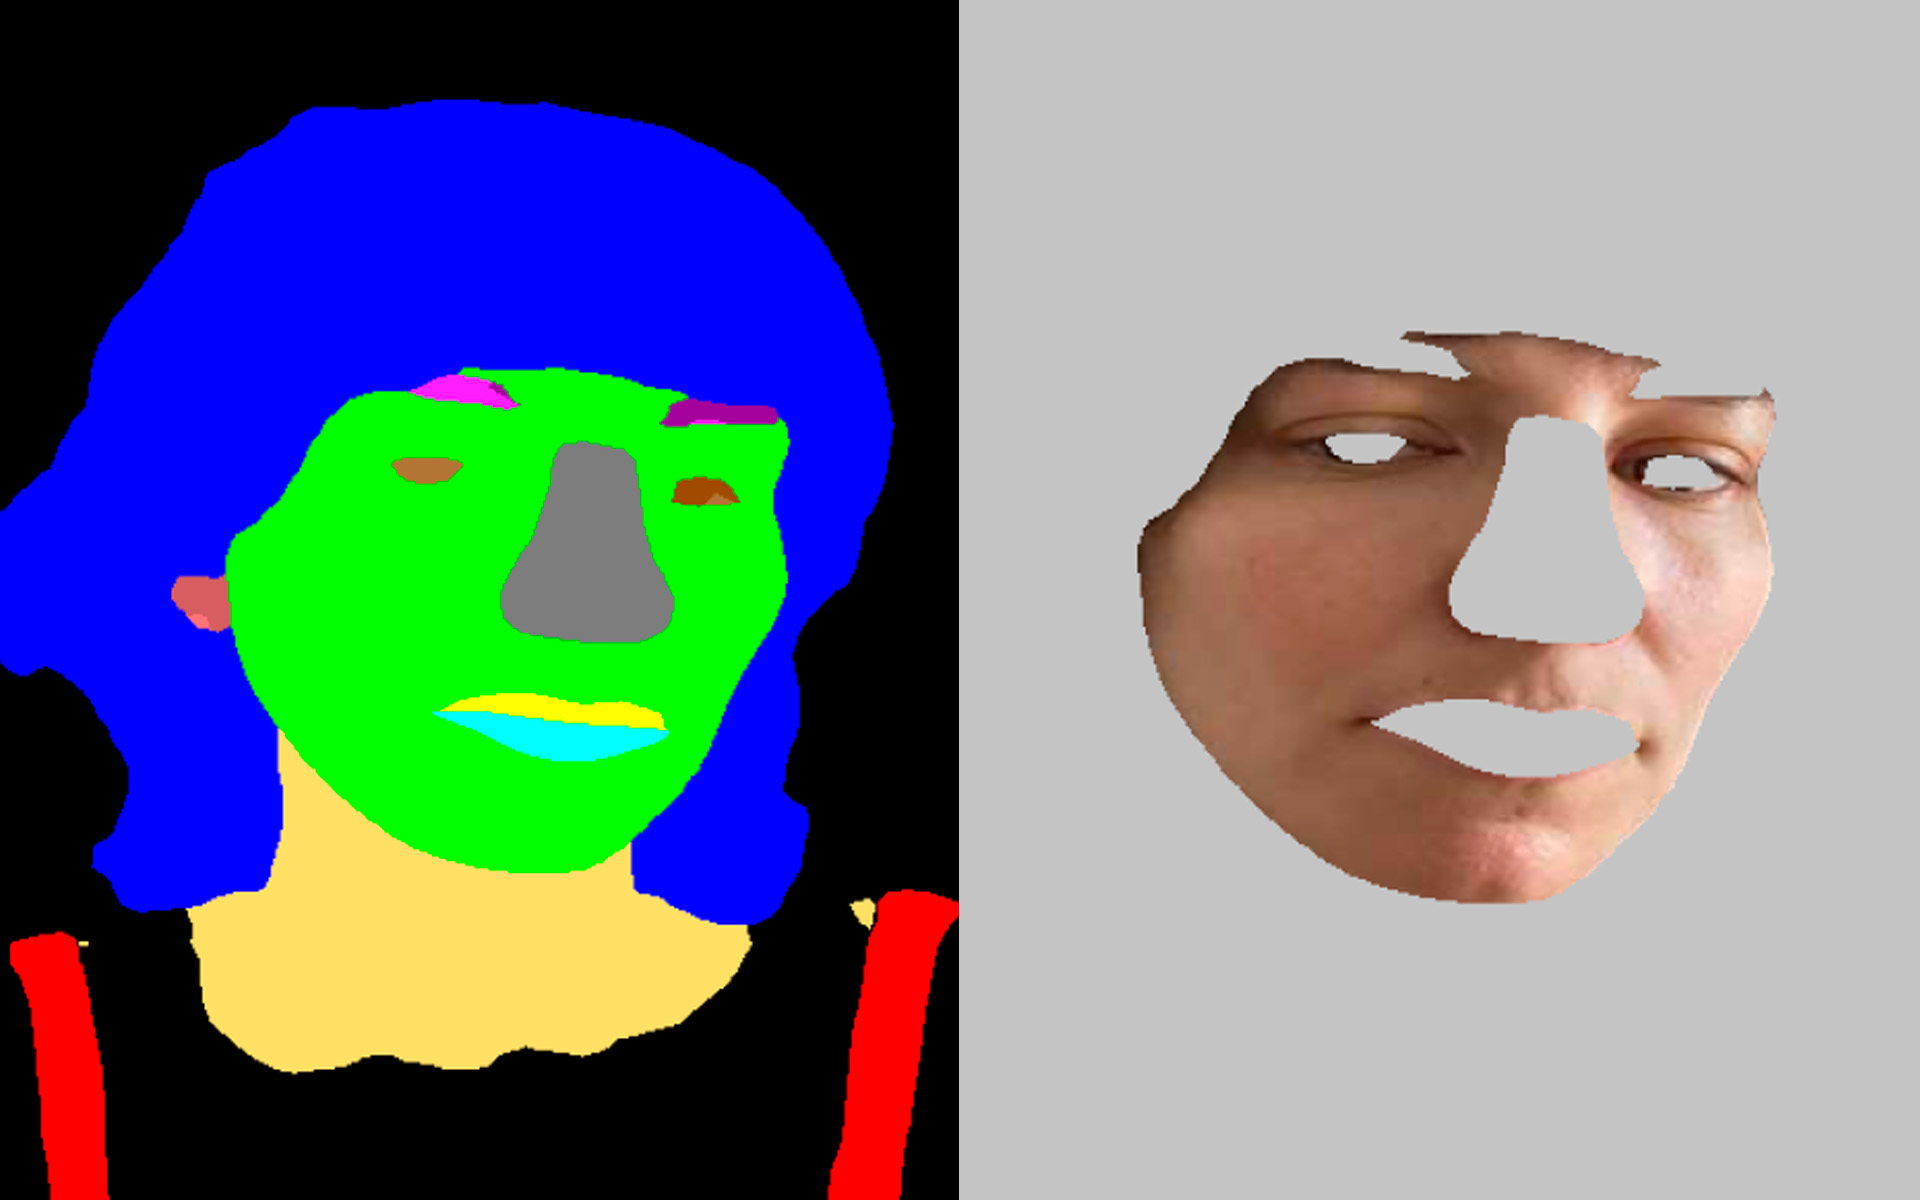 Two screenshots from computer vision software show my face segmented with colors and cut into sections.